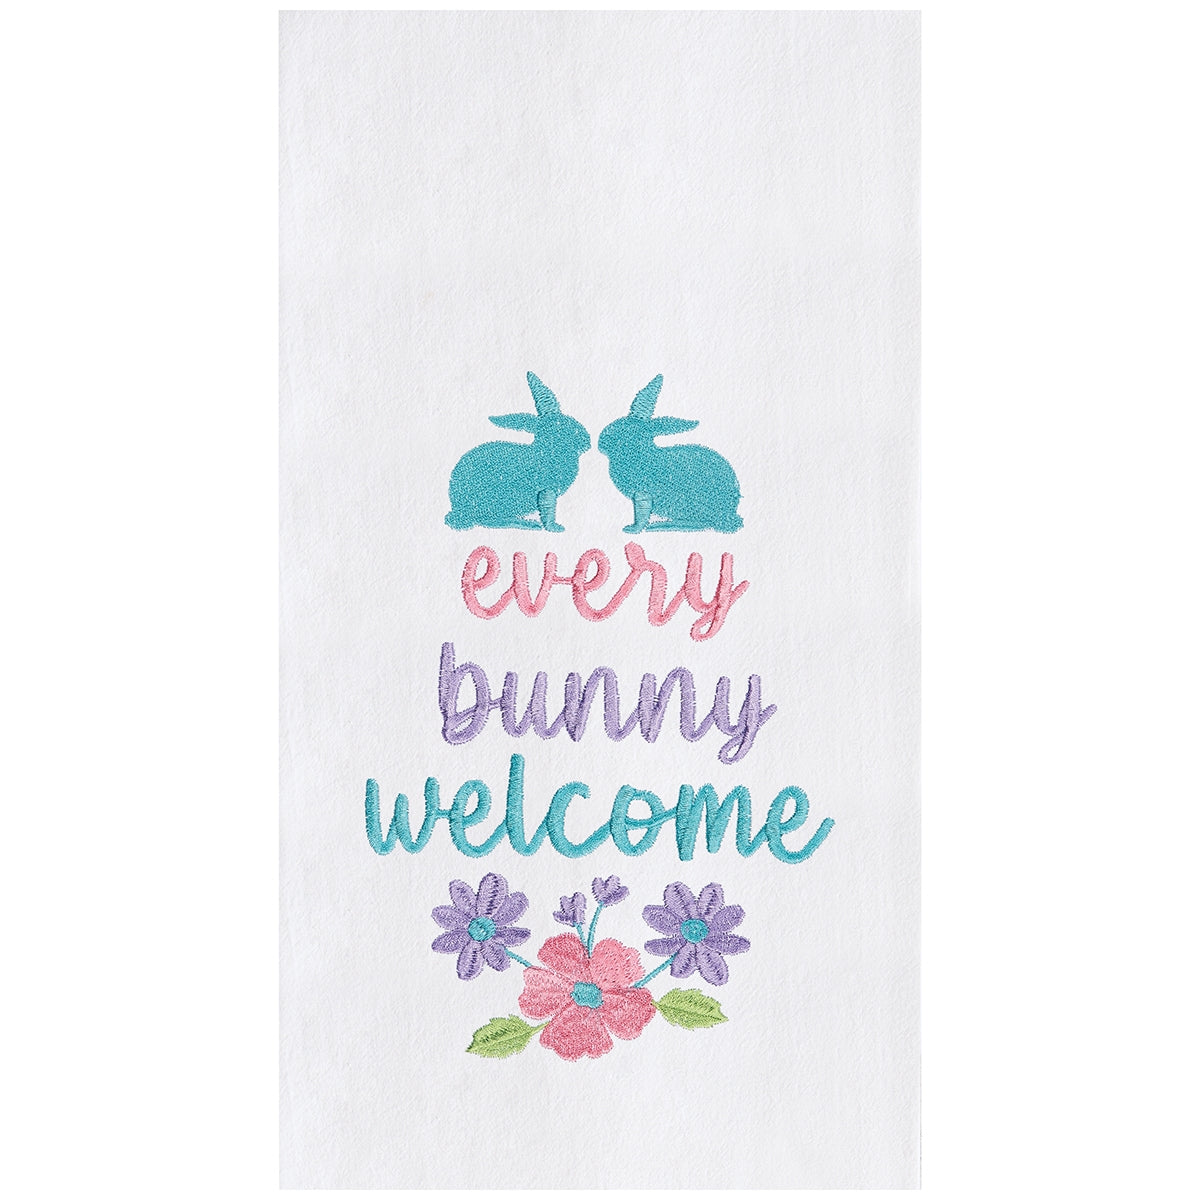 Every Bunny Welcome Embroidered Flour Sack Kitchen Towel    